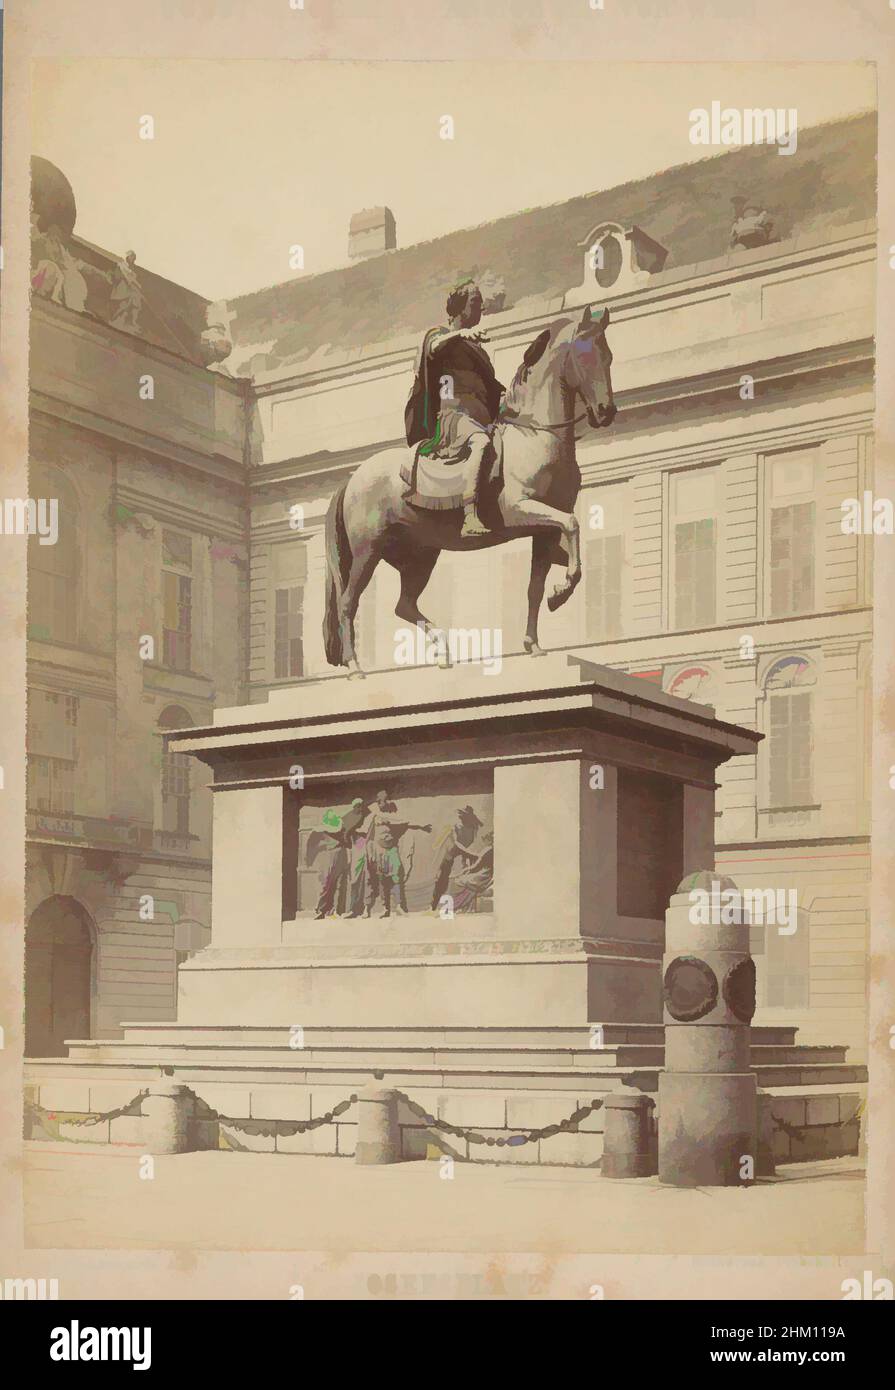 Art inspired by View of Josefsplatz in Vienna with equestrian statue of Joseph II by Franz Anton Zauner, Josefpatz, August Angerer's Ansichten von Wien, M. Frankenstein & Co., Vienna, c. 1875 - c. 1885, photographic support, cardboard, albumen print, height 140 mm × width 100 mm, Classic works modernized by Artotop with a splash of modernity. Shapes, color and value, eye-catching visual impact on art. Emotions through freedom of artworks in a contemporary way. A timeless message pursuing a wildly creative new direction. Artists turning to the digital medium and creating the Artotop NFT Stock Photo